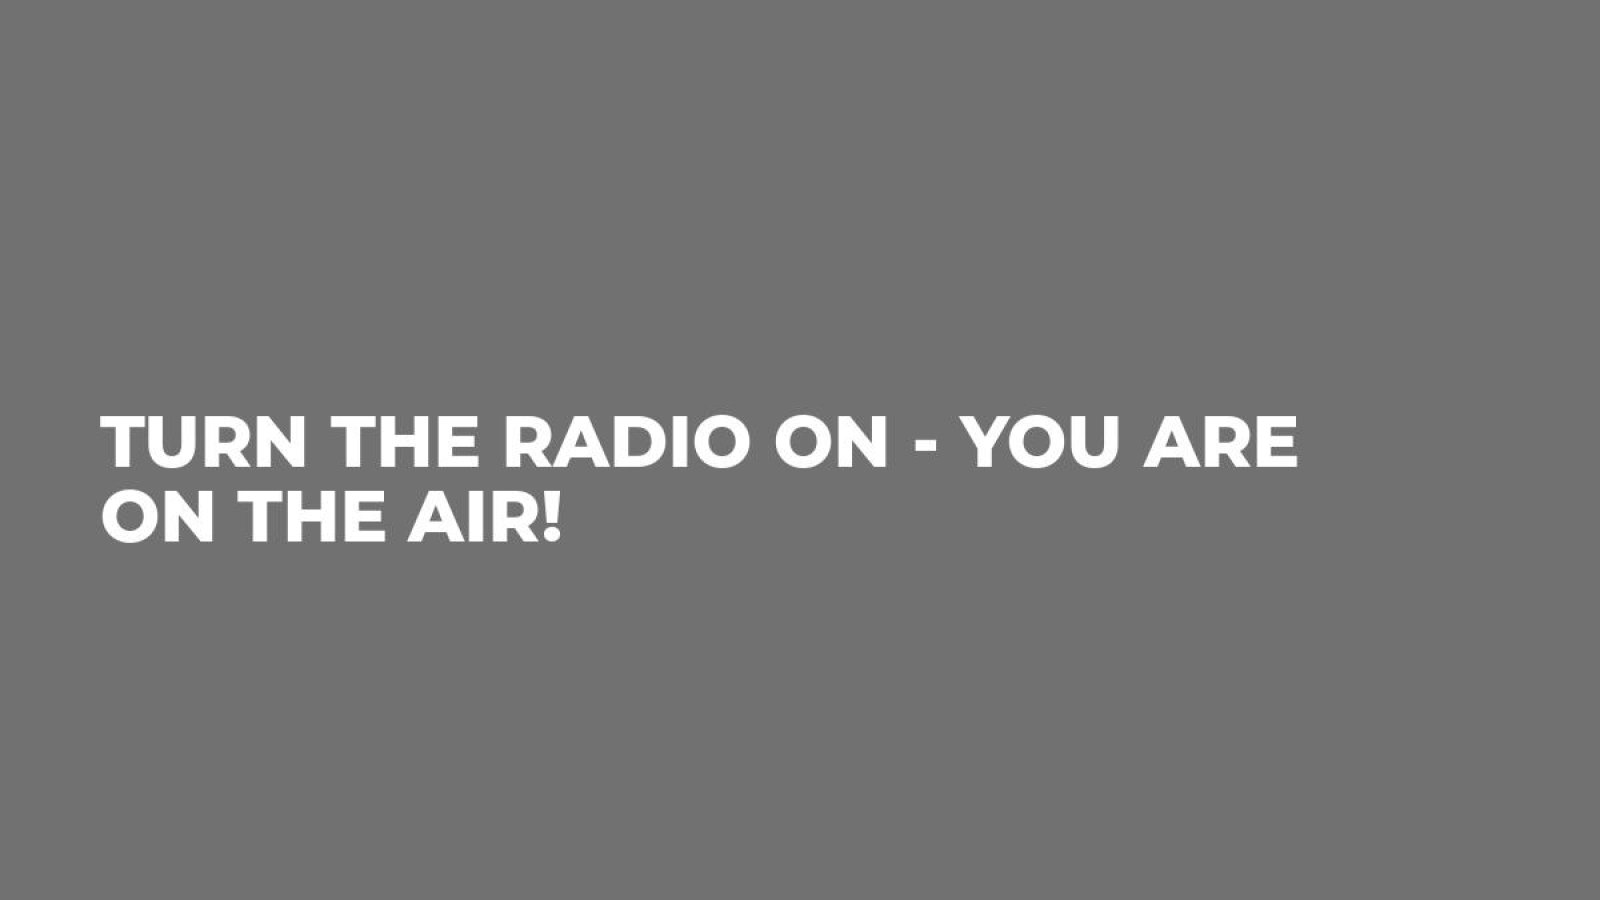 Turn the radio on - you are on the air!